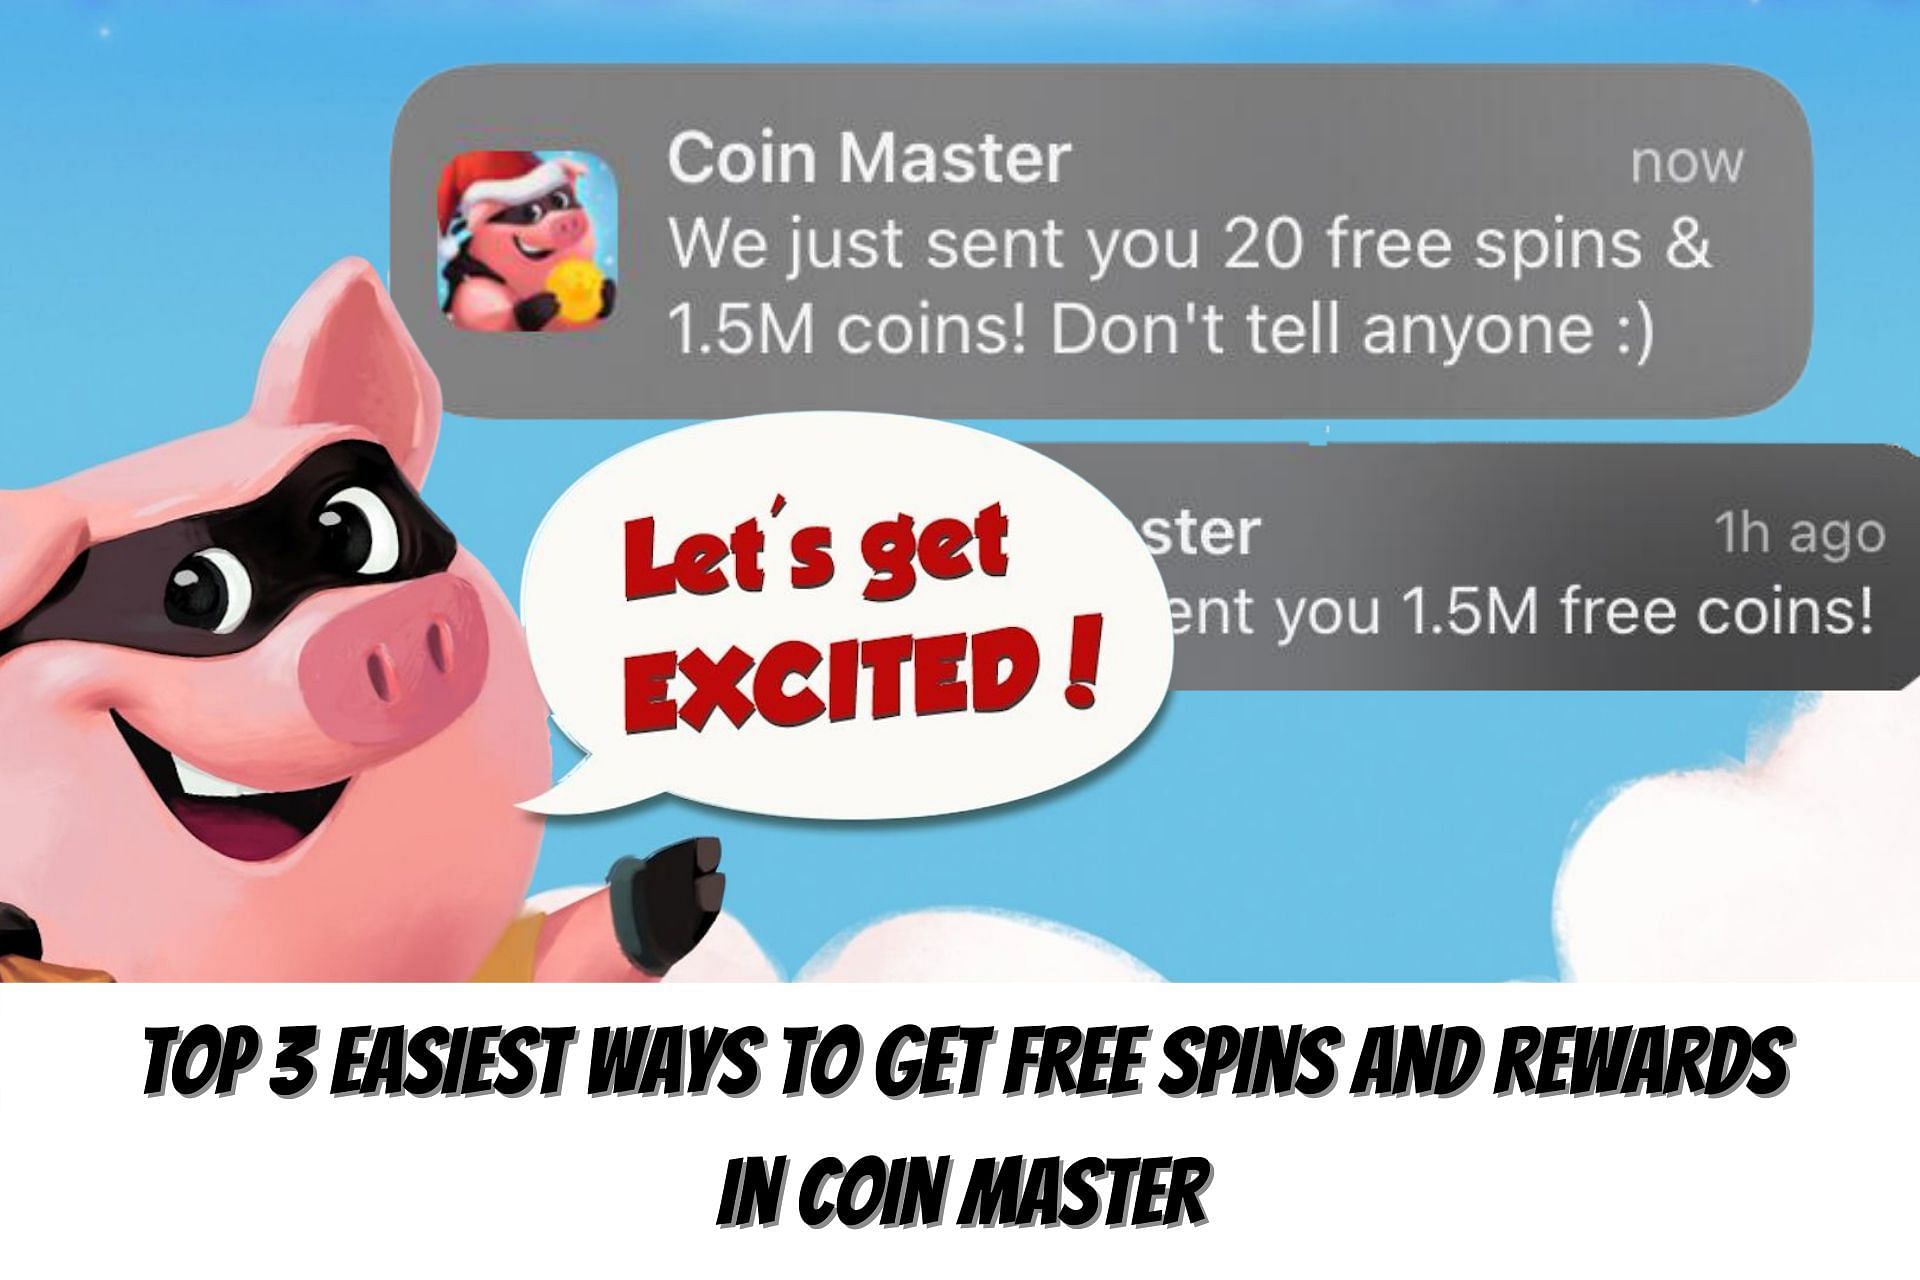 The Coin Master community is always on the lookout for more ways to get free spins. (Image via Sportskeeda)